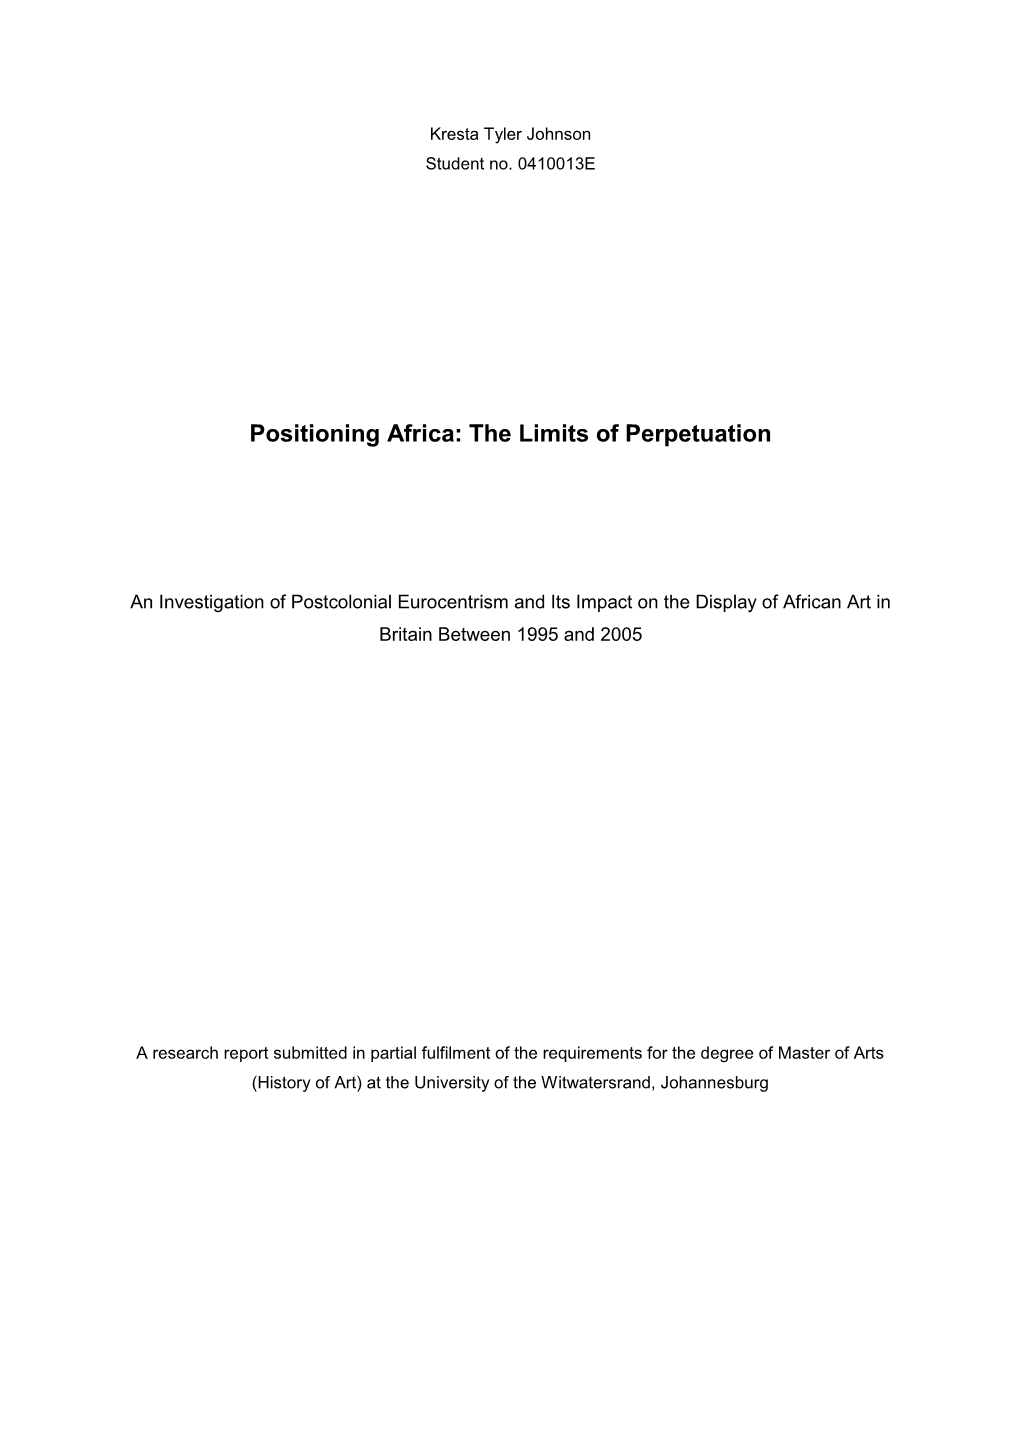 Positioning Africa: the Limits of Perpetuation